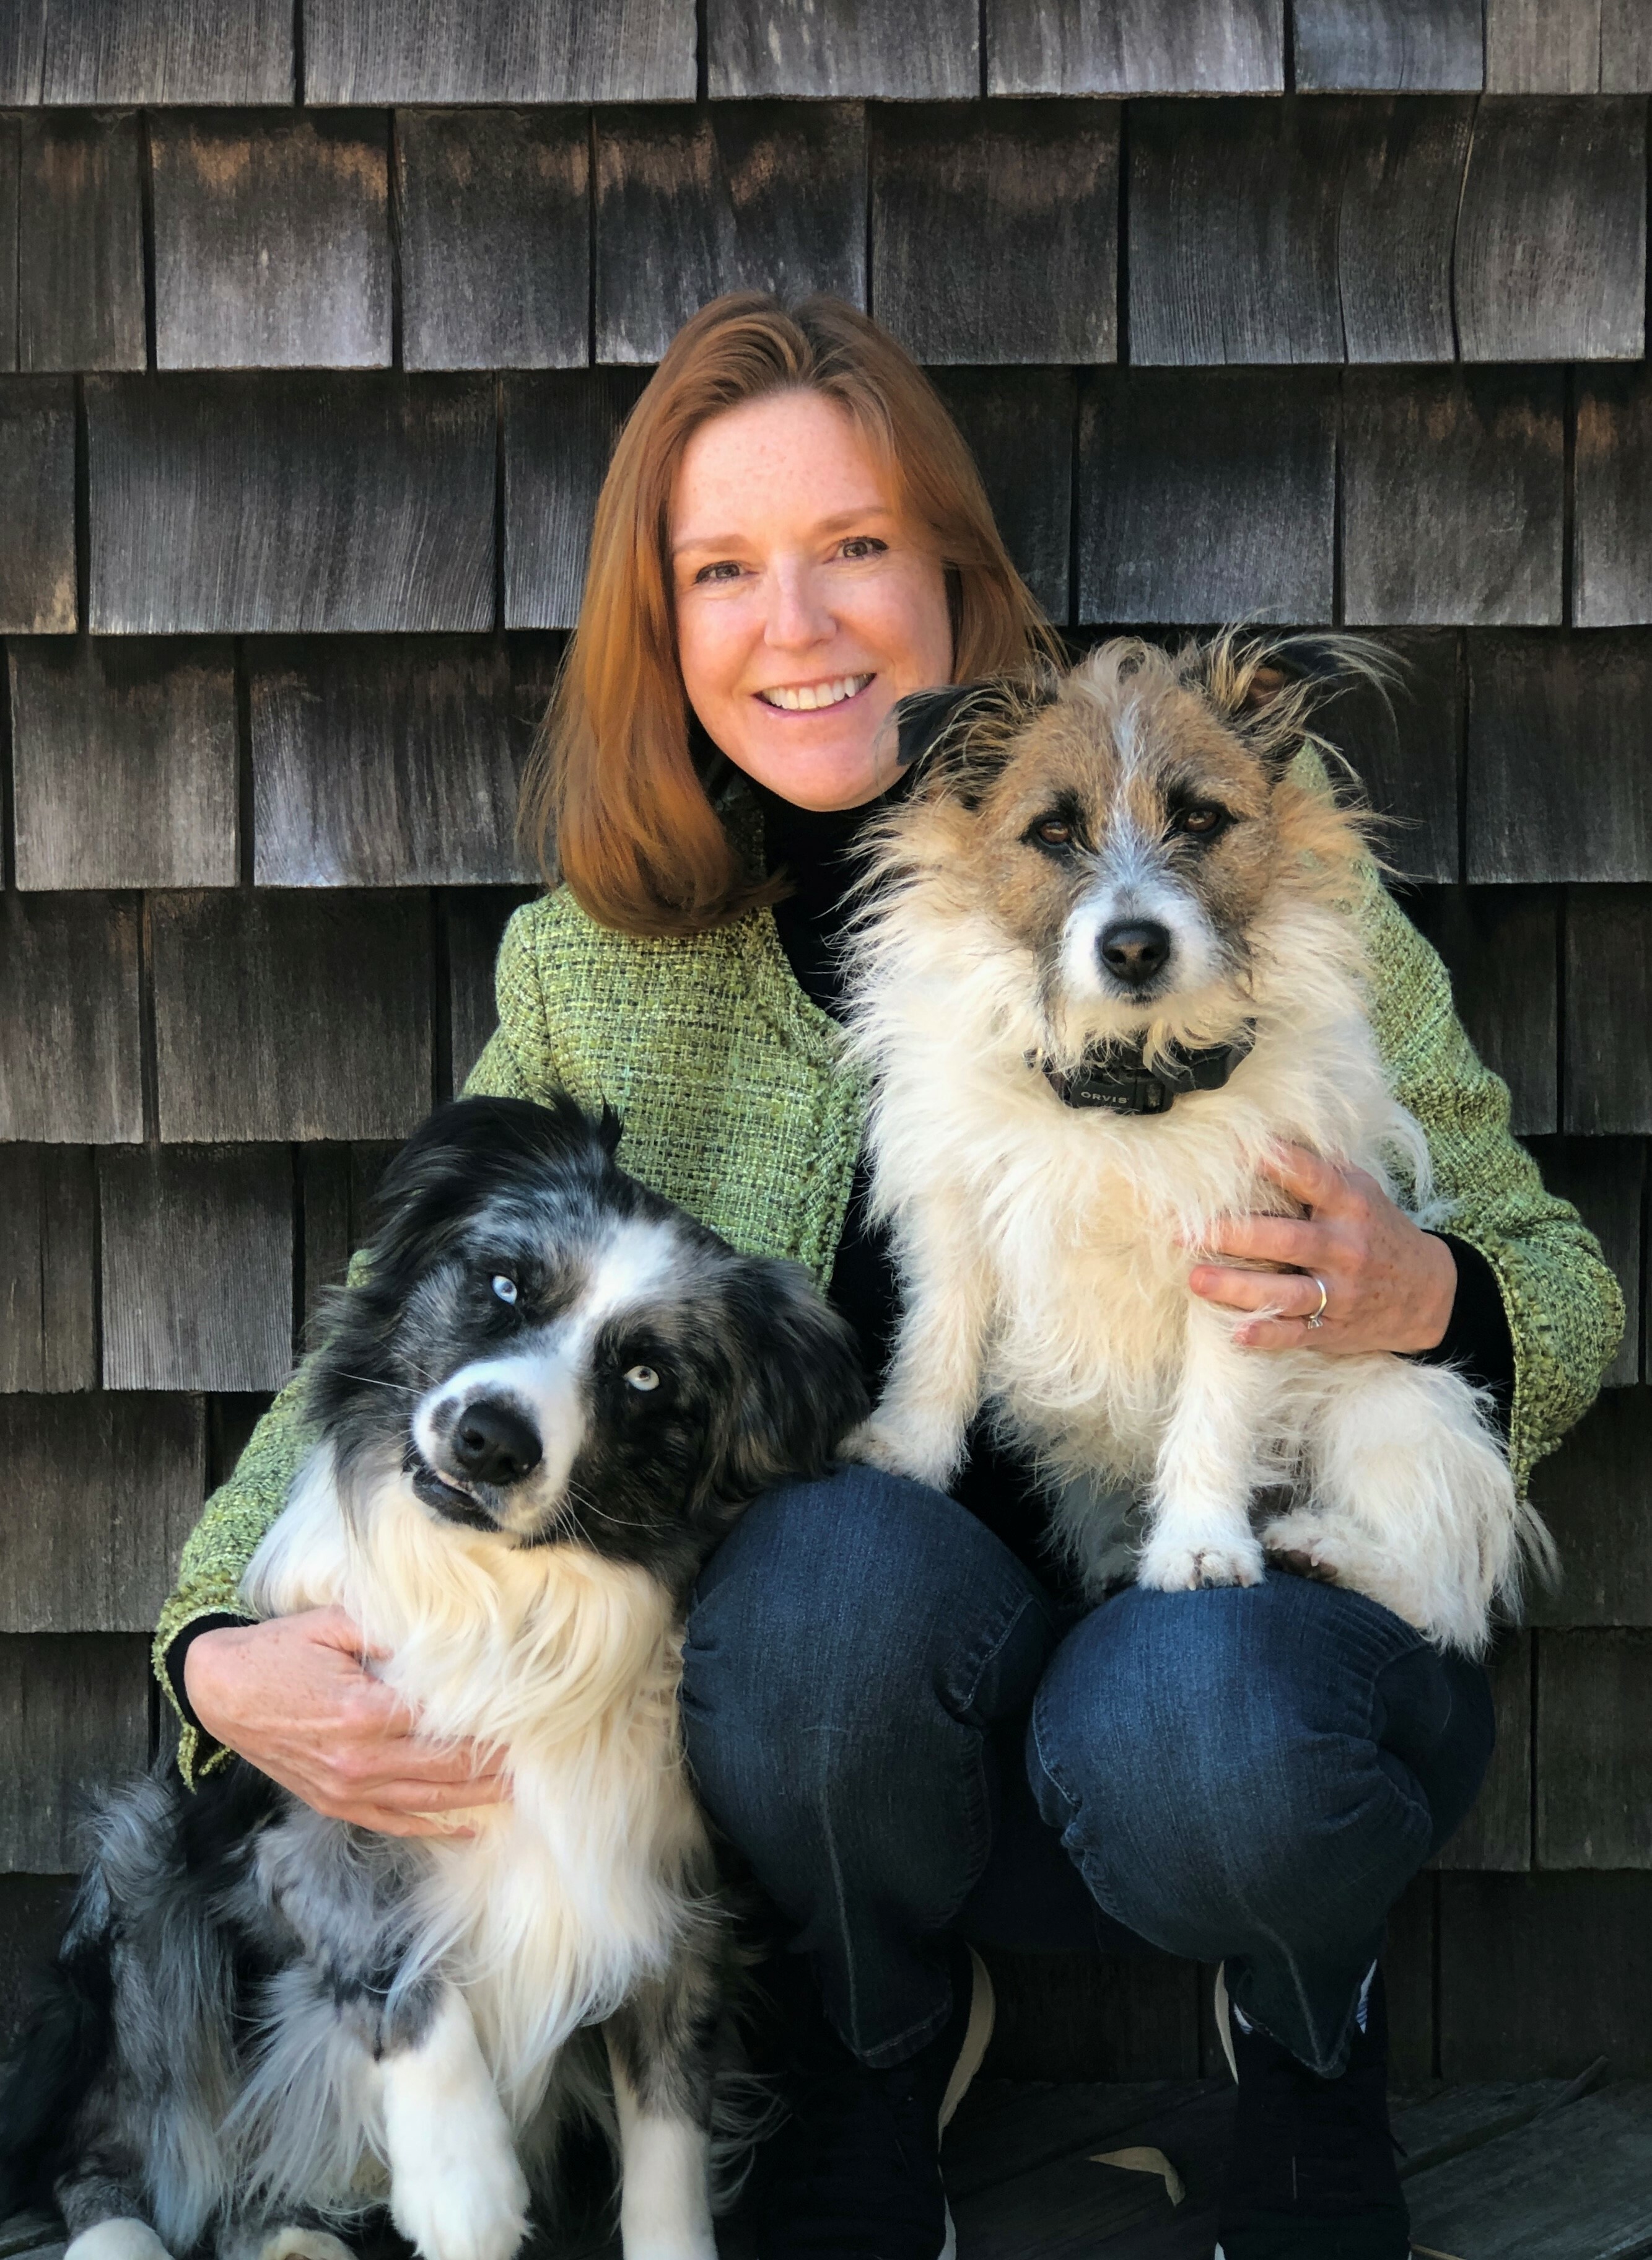 ARF Executive Director Kimberly Nichols with her dogs, Otis and Jack. COURTESY ARF